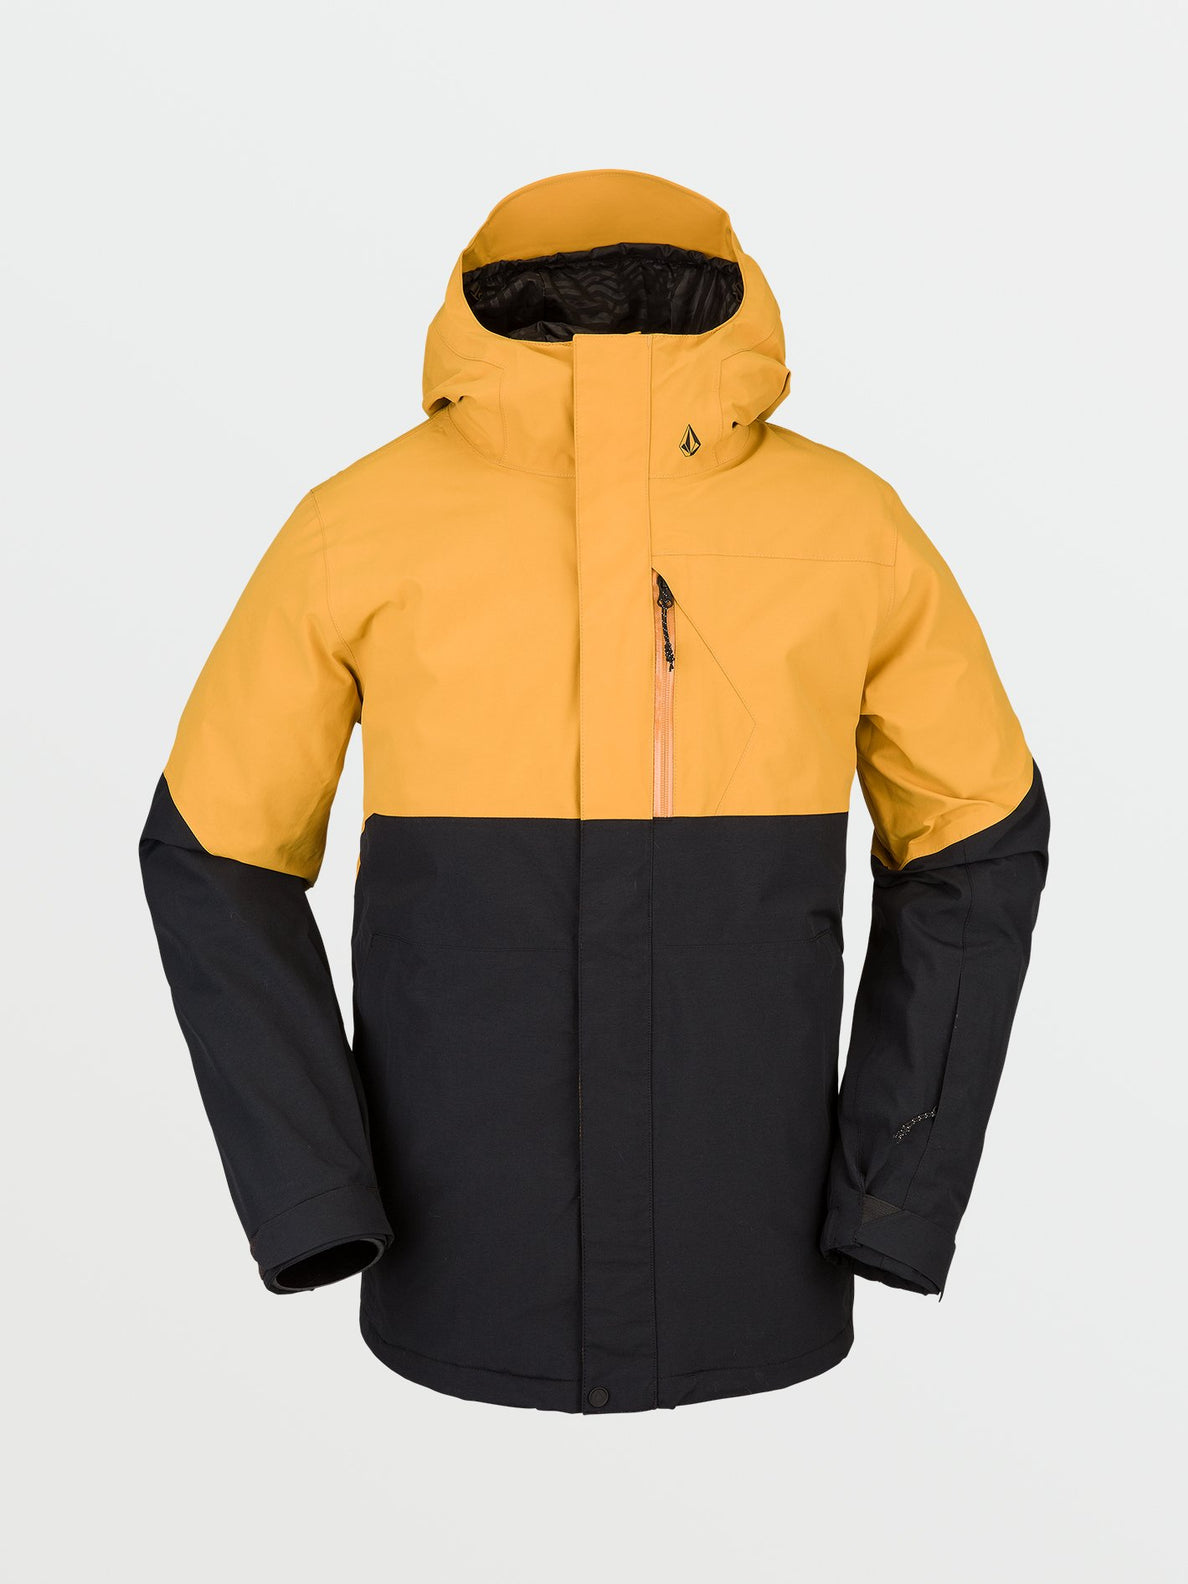 L Insulated Gore-Tex Jacket - RESIN GOLD (G0452211_RSG) [F]